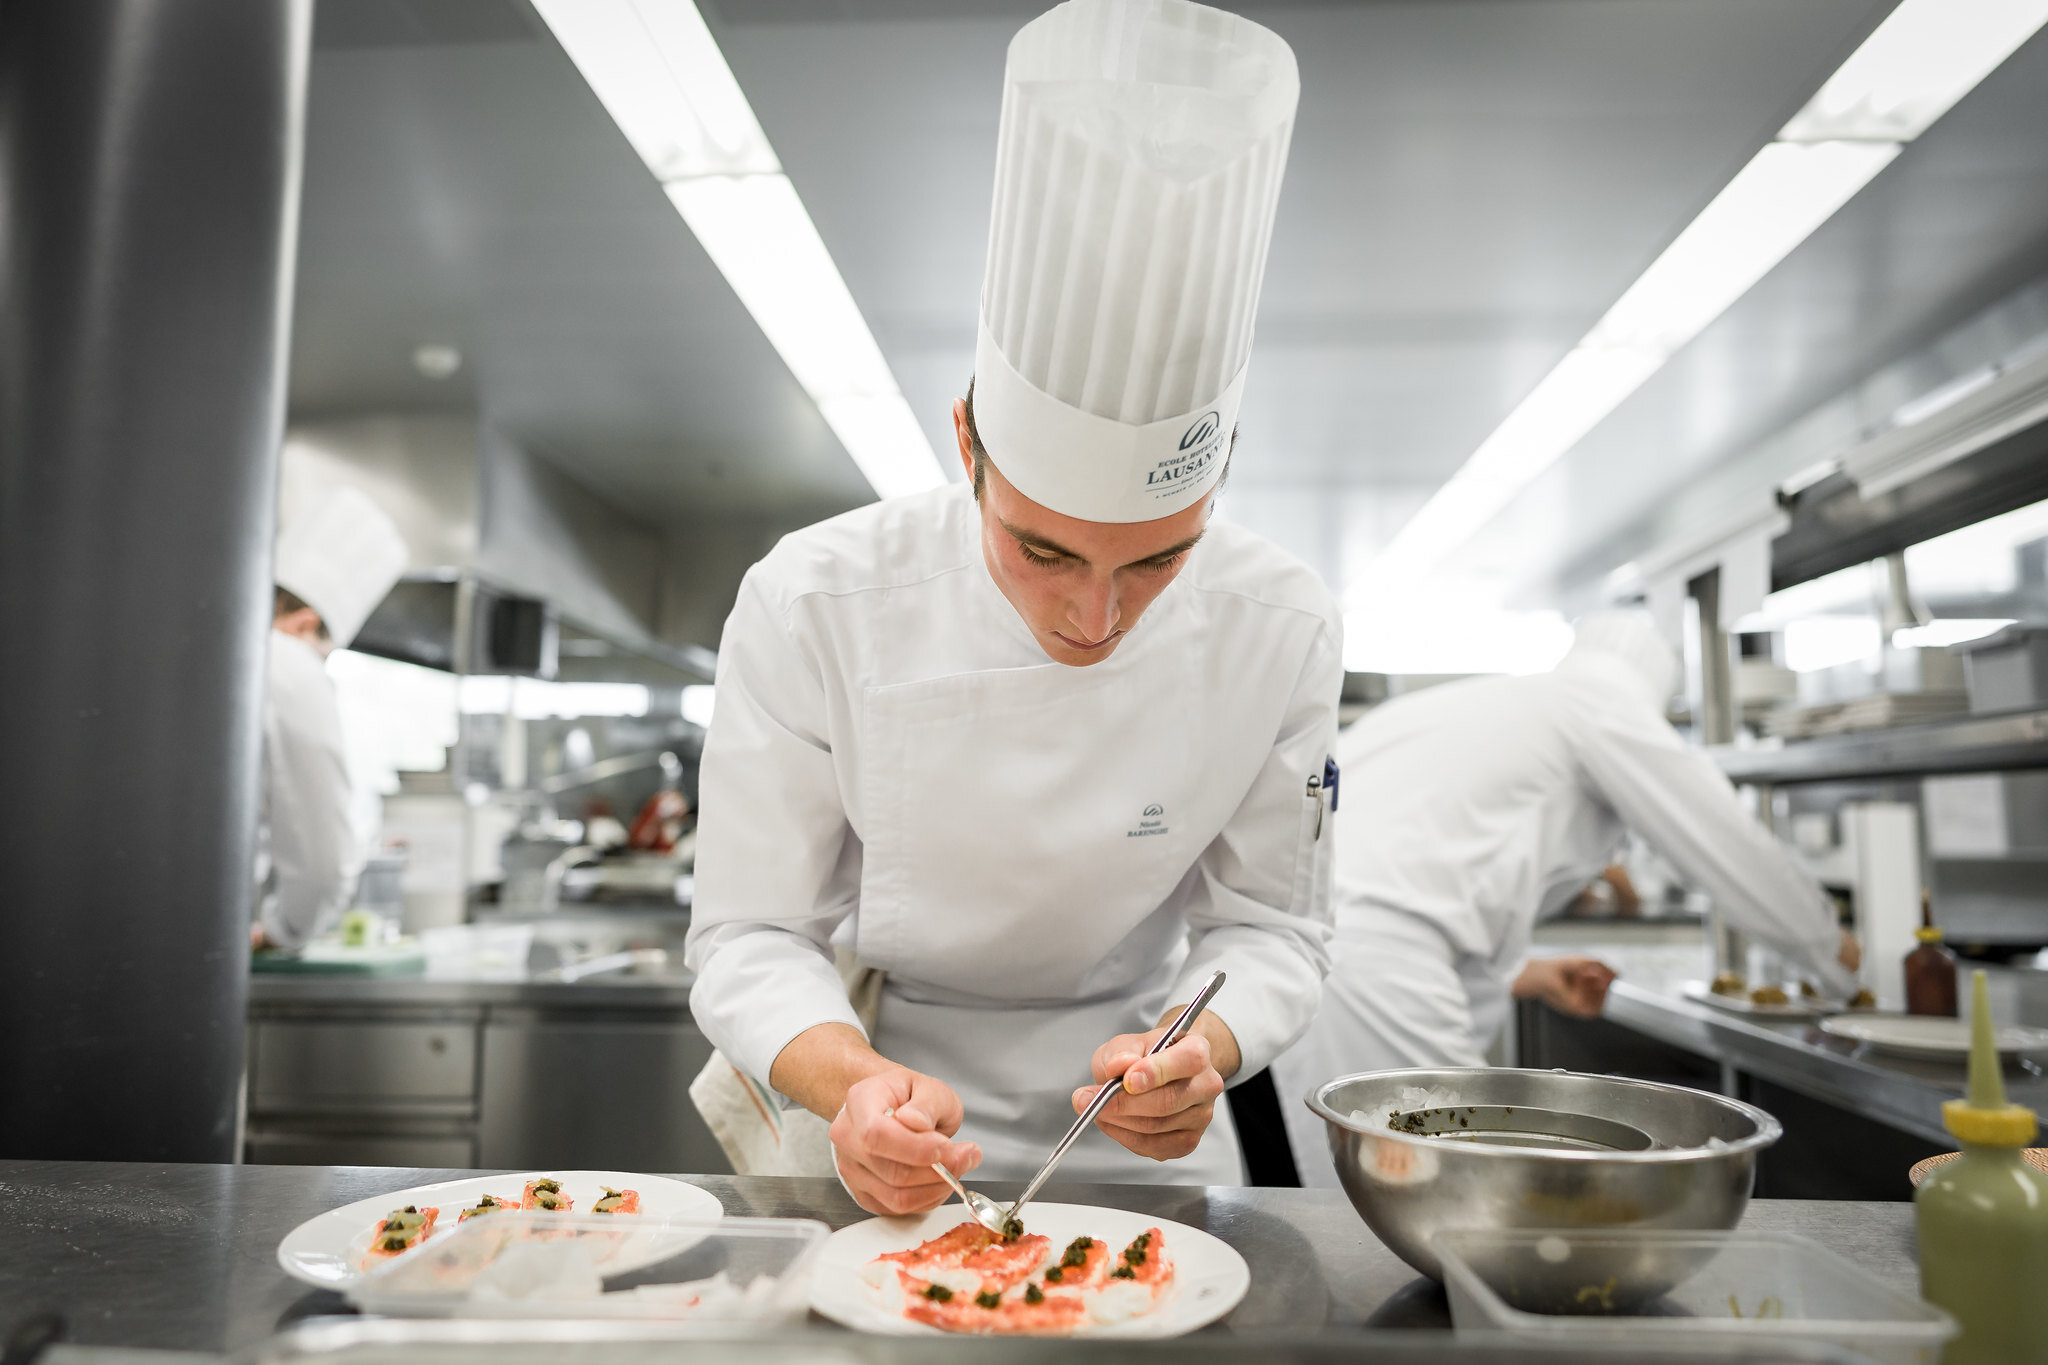 Culinary Professional Diploma - Successfully work independently in the kitchen and be well-equipped to enter the industry and reach a supervisory position in a short period of time. 